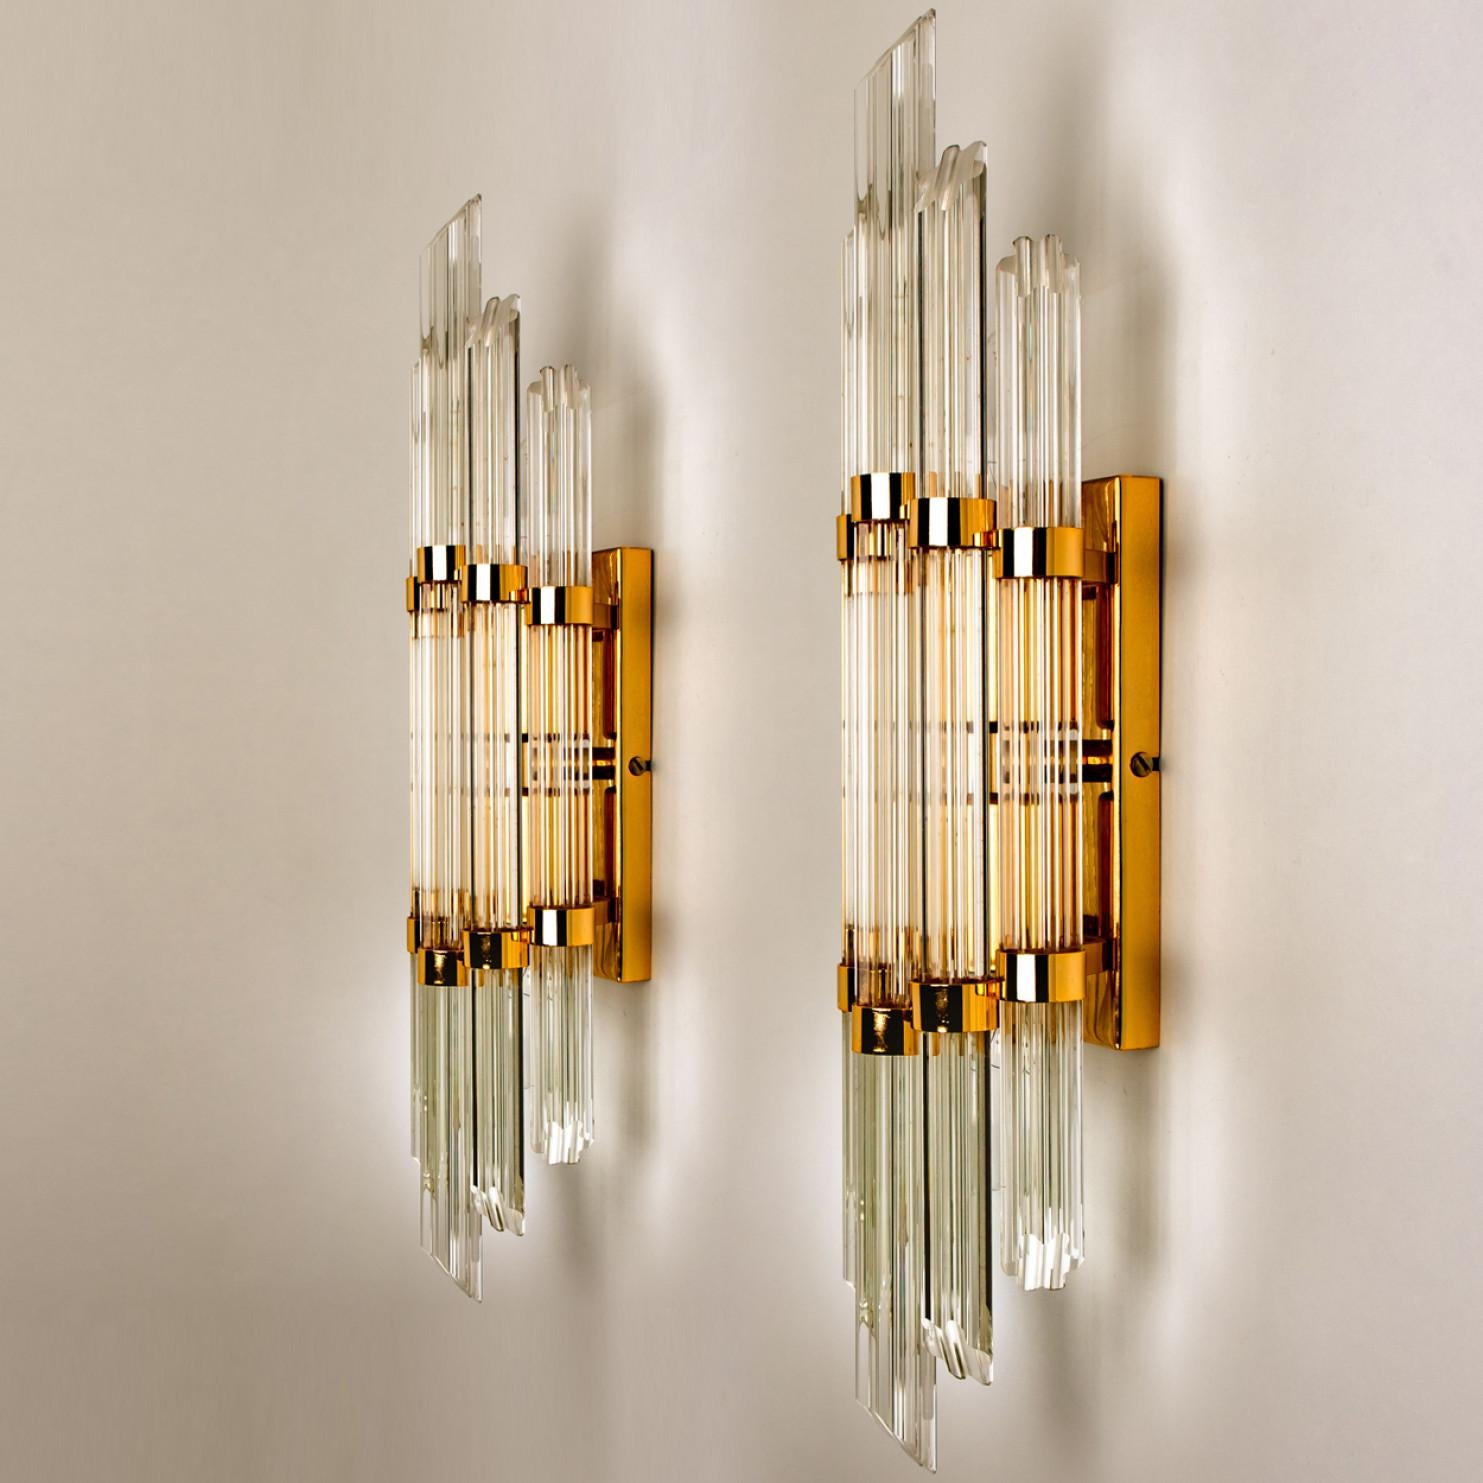 Wonderful high-end wall sconces in the style of Sciolari. With flower shaped glass and brass details giving each piece an elegant appearance which refracts the light, filling a room with a soft, warm glow.

The wall sconce has a brass back